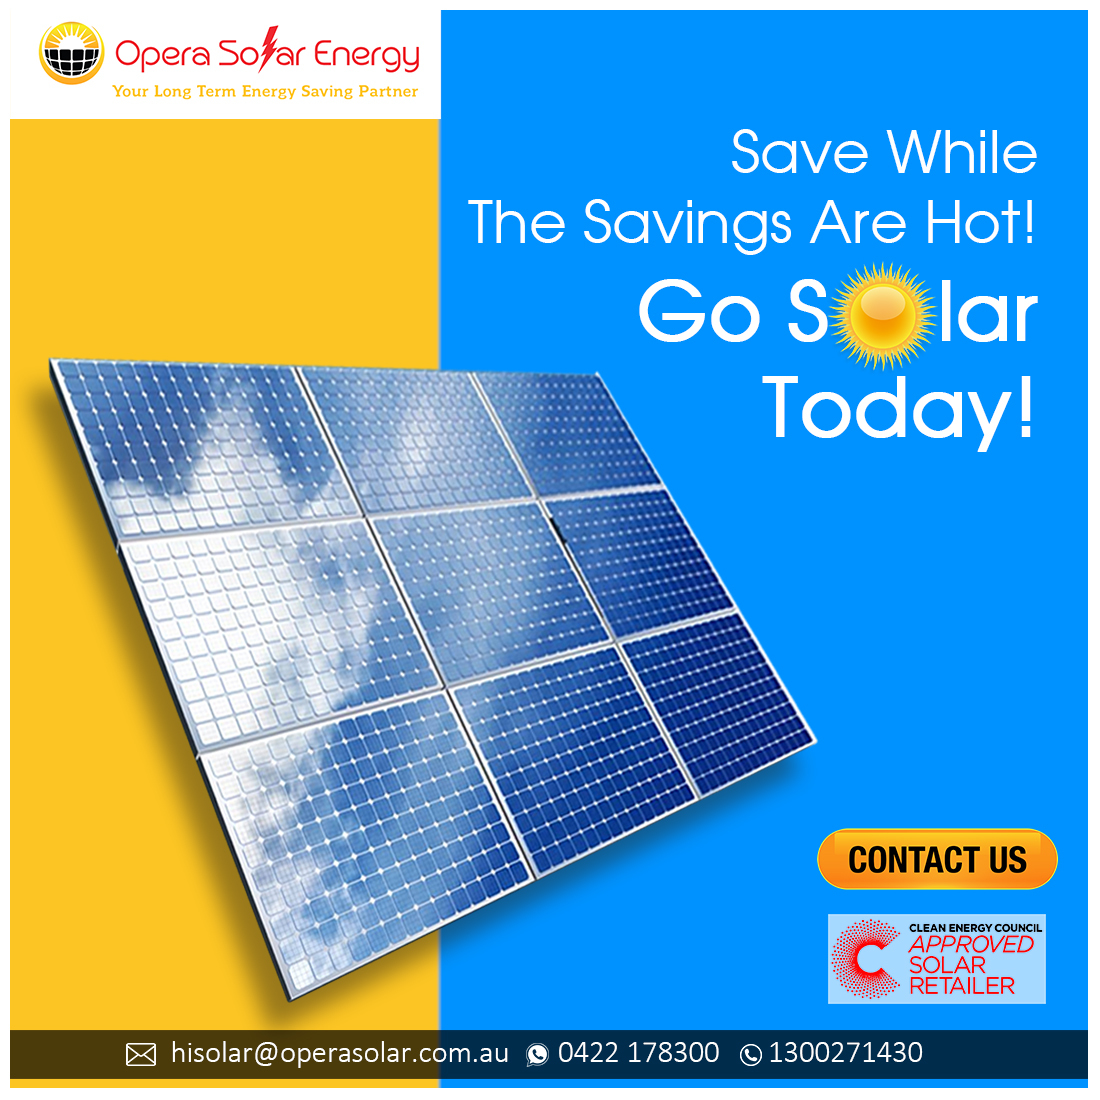 Today is the perfect time to get going on your solar installation.'
☎️ : 1300 271 430
📞 : 0422 178 300
📧 : hisolar@operasolar.com.au
#solarpanelinstaller #solarpanels #solarenergy #solarpowerenergy #opersolarenergy #sydney #australia #energy